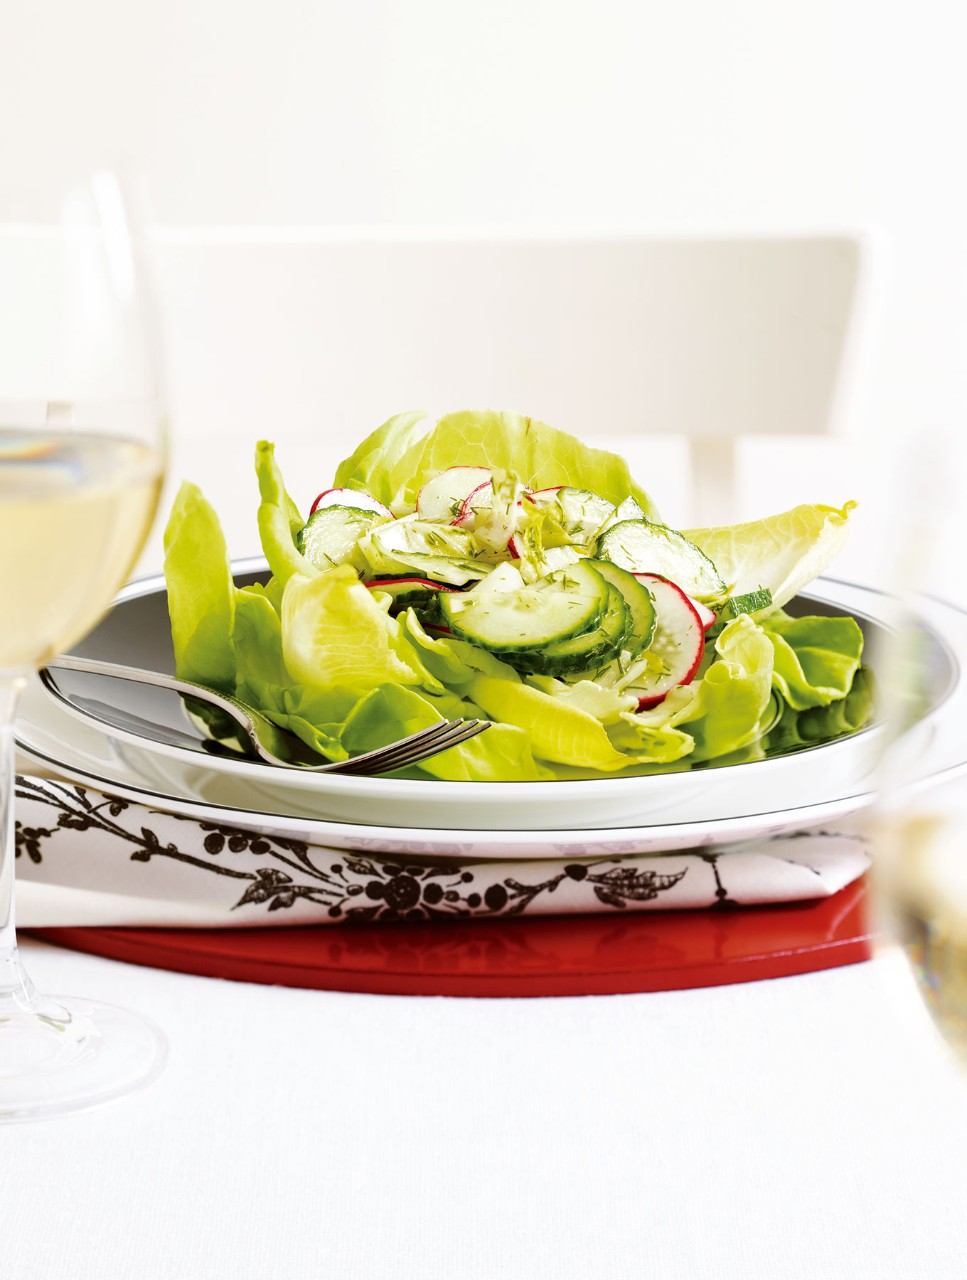 Dilled Cucumber and Belgian Endive Salad